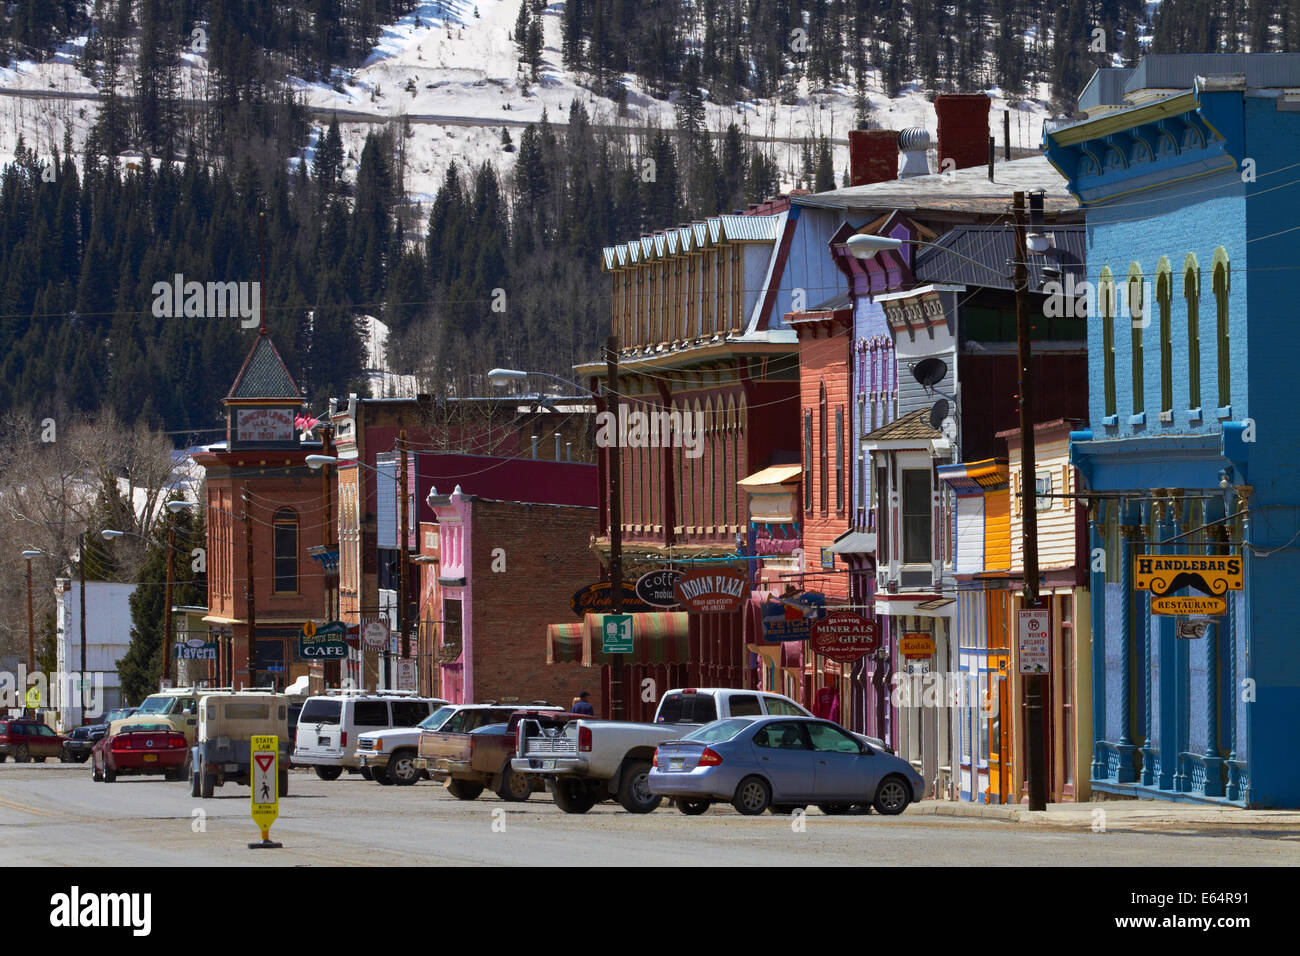 The historic mining town of Silverton, at an altitude of 9,305 ft / 2,836 m, in the San Juan Mountains, Colorado, USA Stock Photo